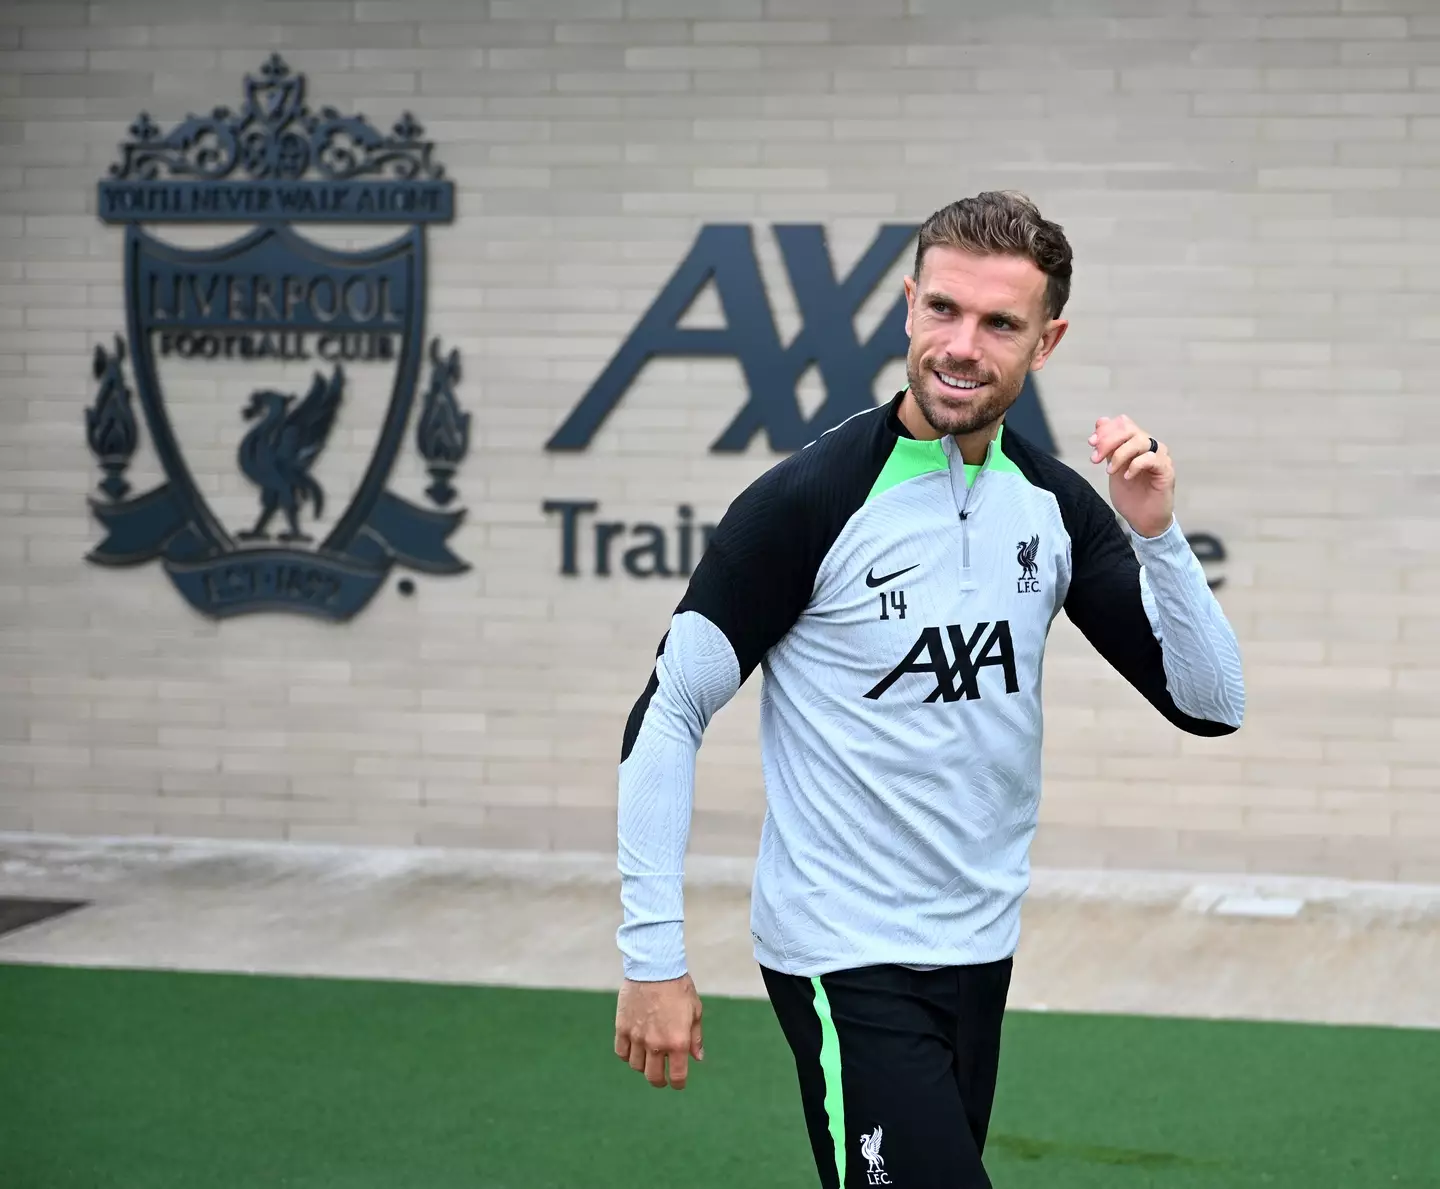 Jordan Henderson training with Liverpool before his summer exit (Getty)